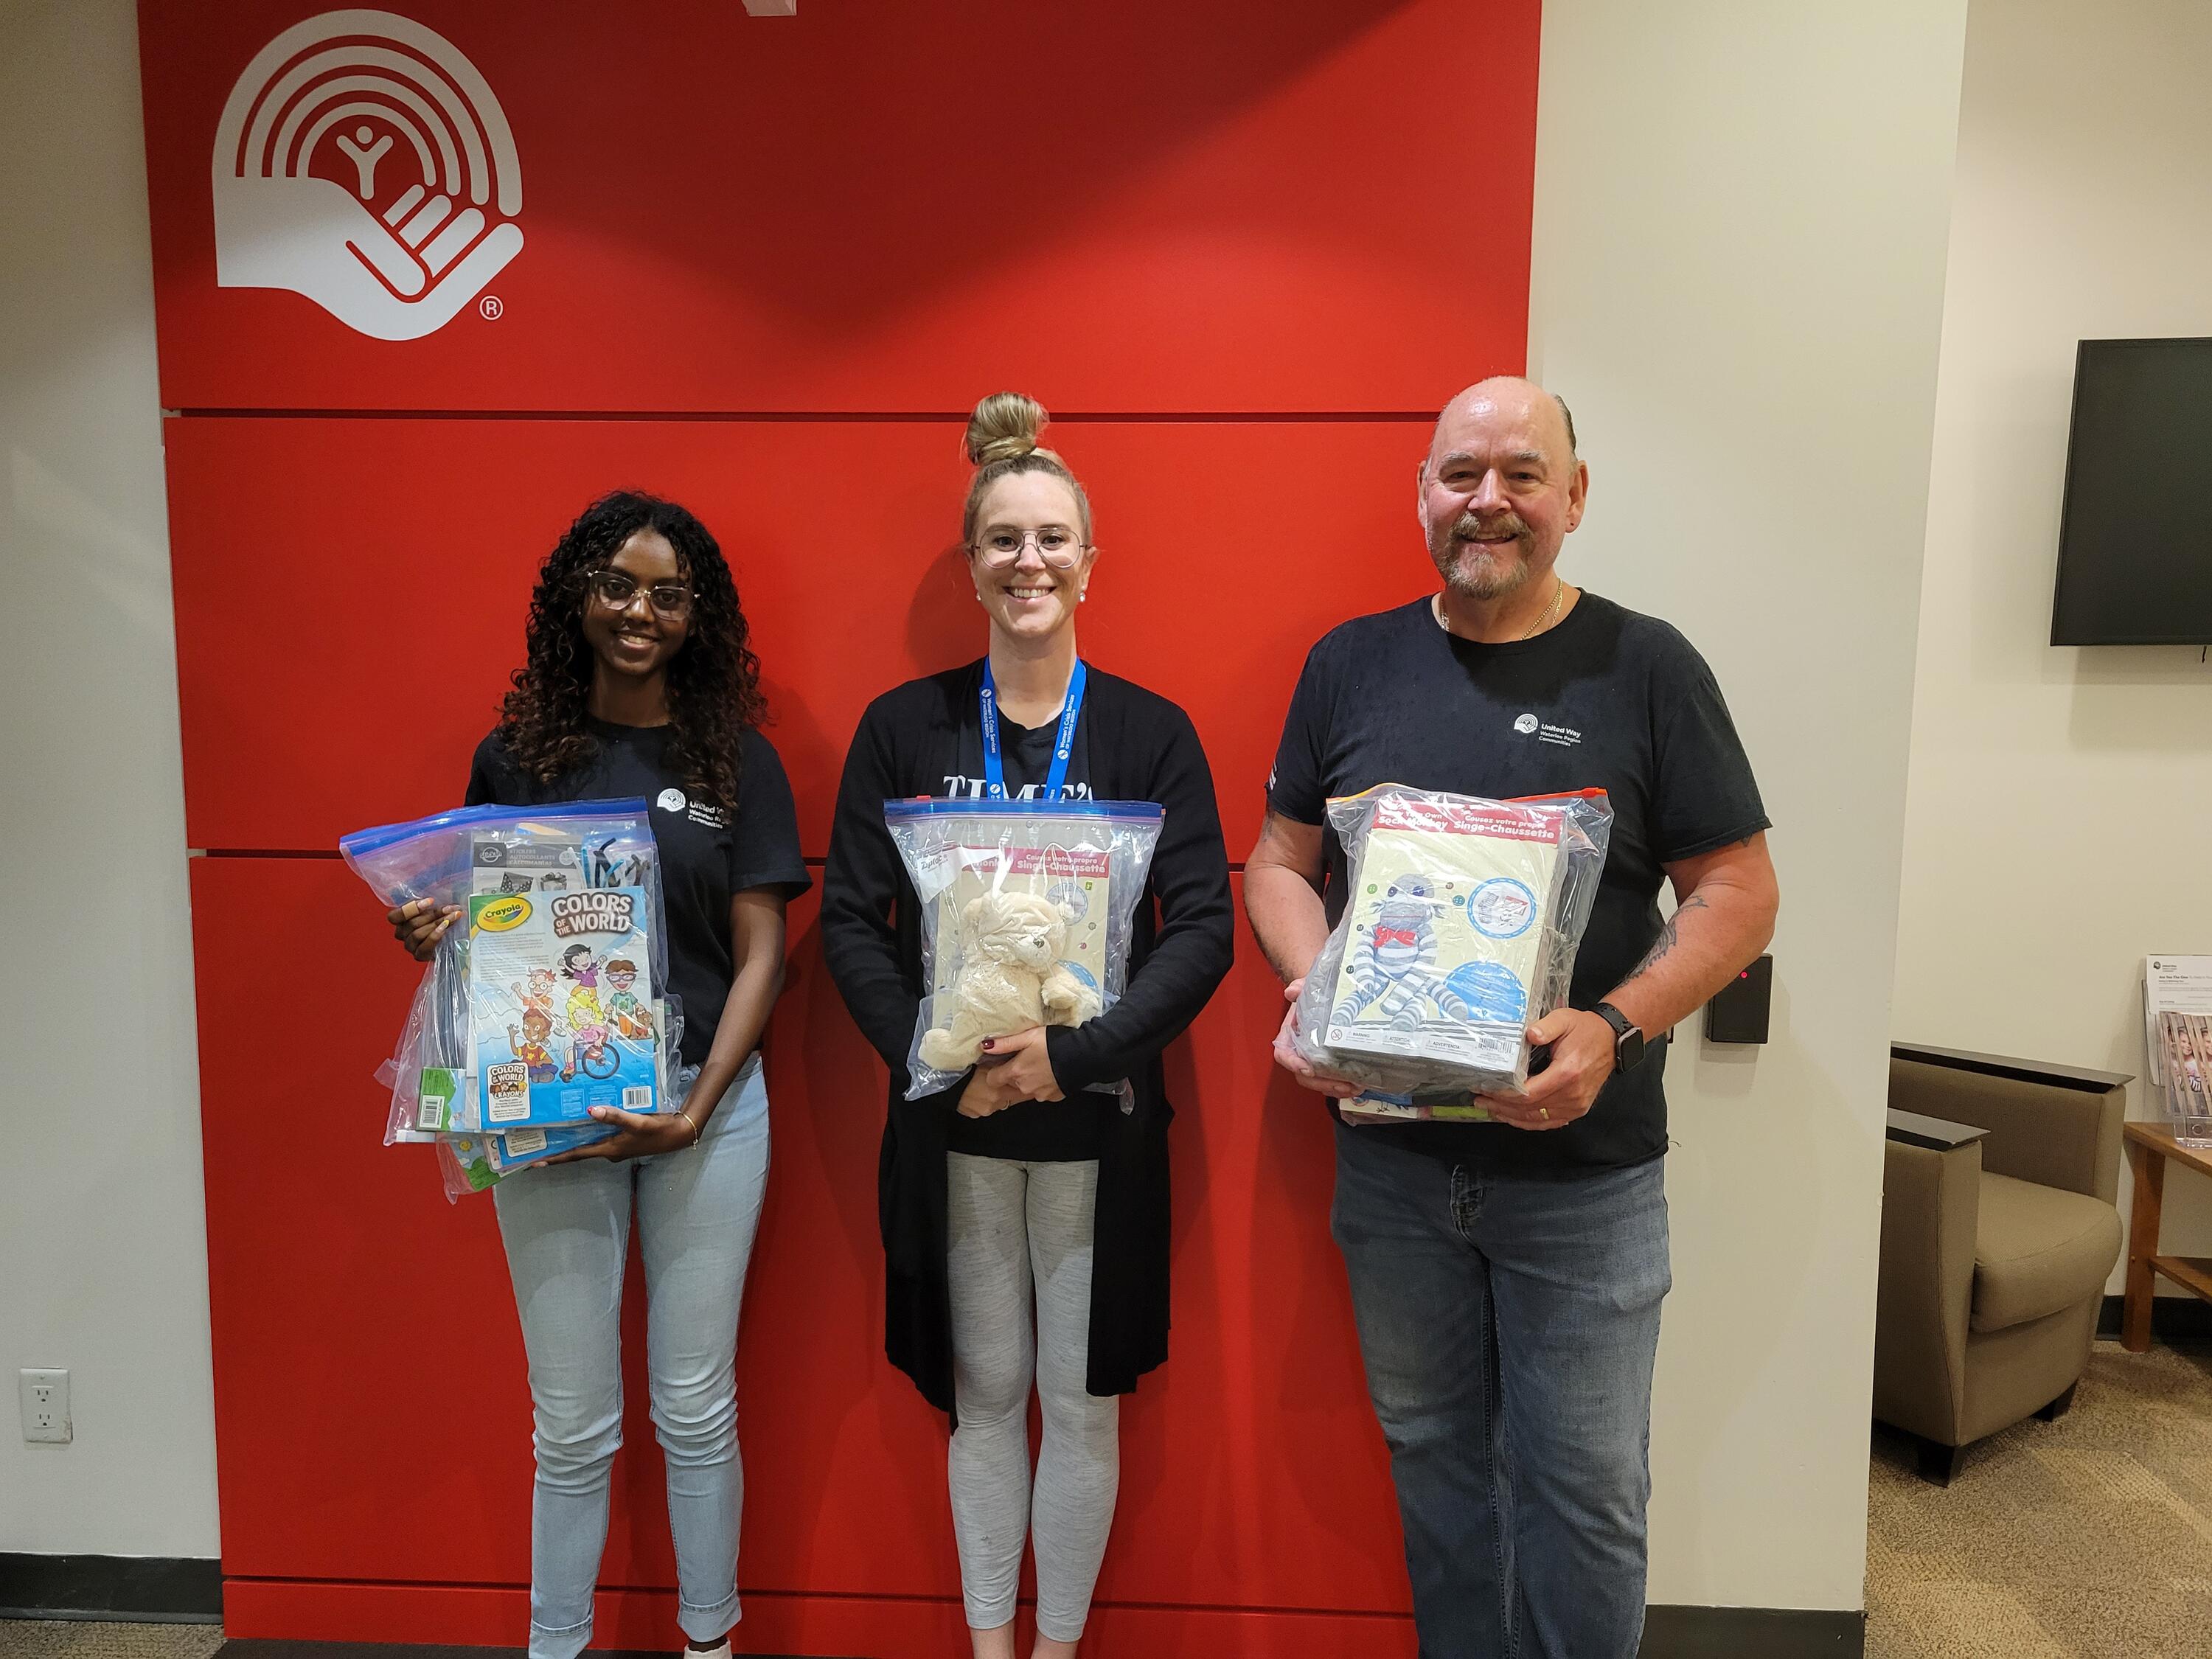 Three United Way employees and co-op students holding donation packages for kids